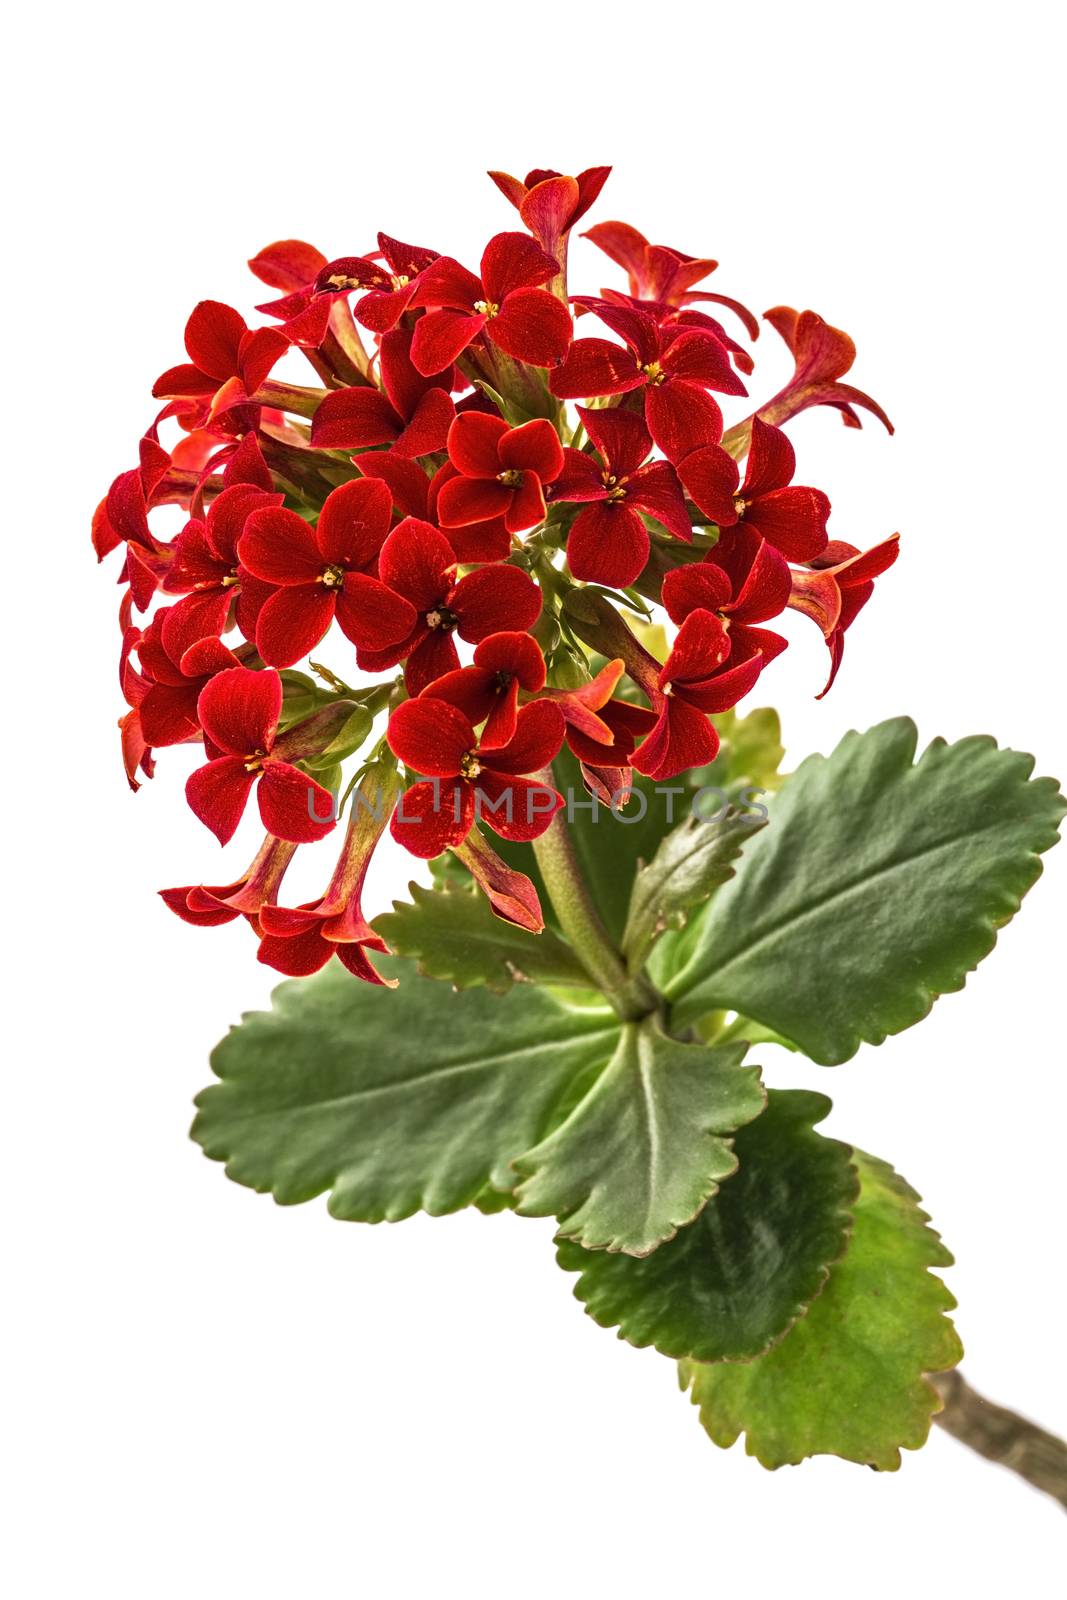 Flower Kalanchoe, tropical succulent, isolated on white background